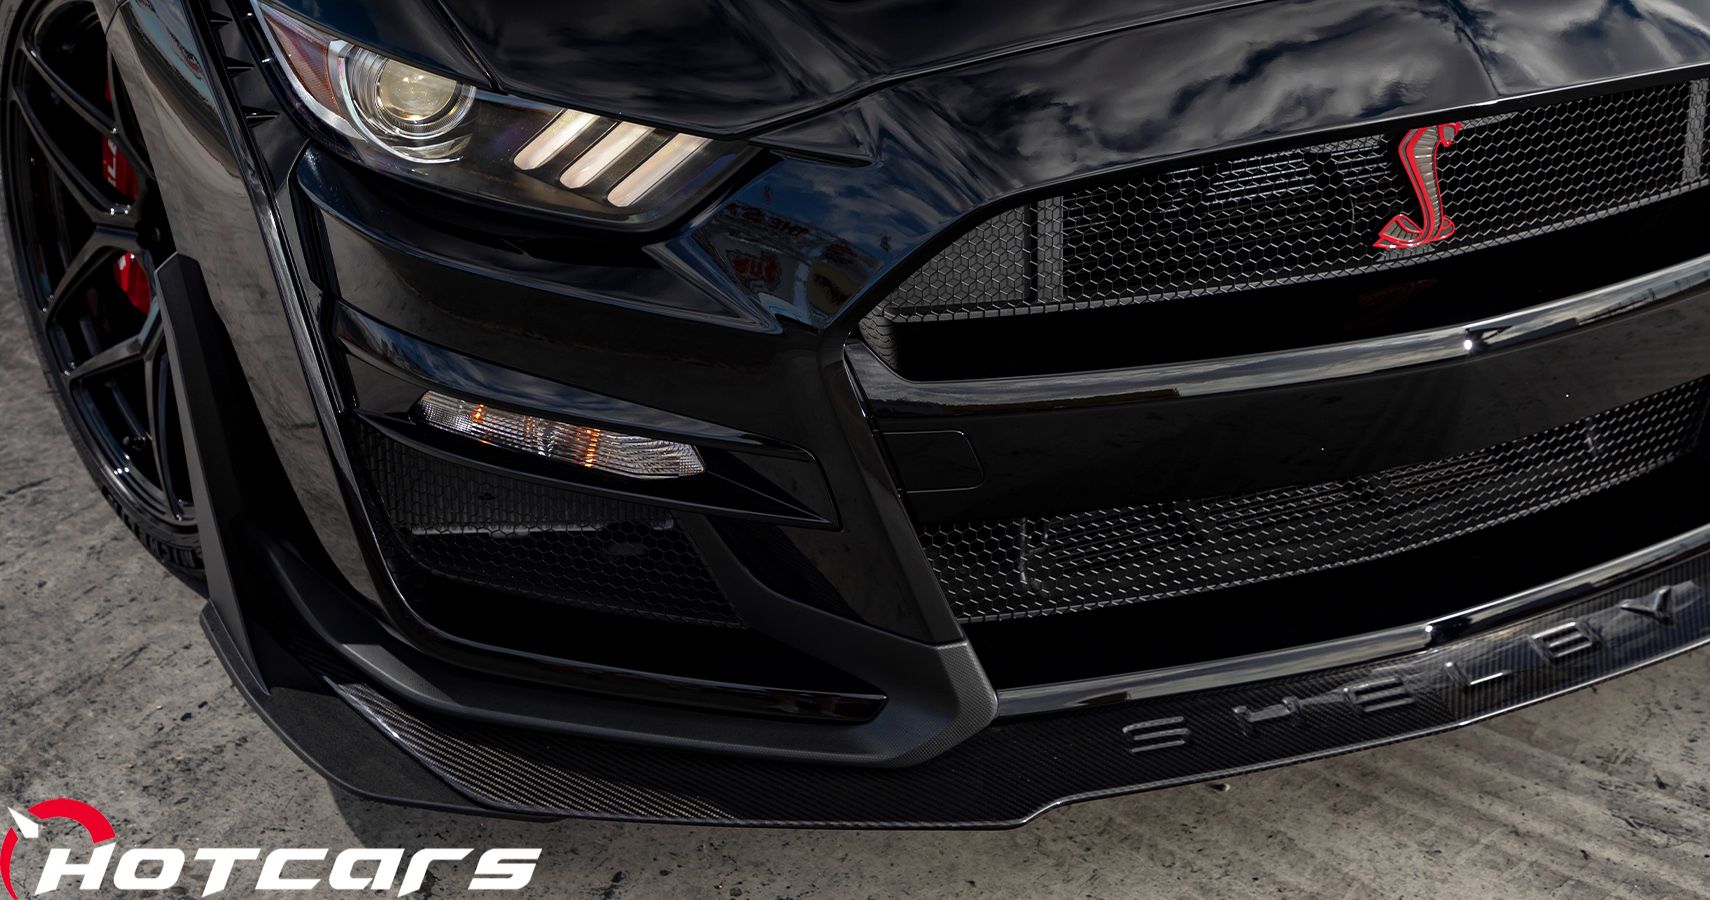 LEAKED: Shelby Will Unveil New Twin-Turbo GT500 "Code Red" With 1300+ HP This Weekend